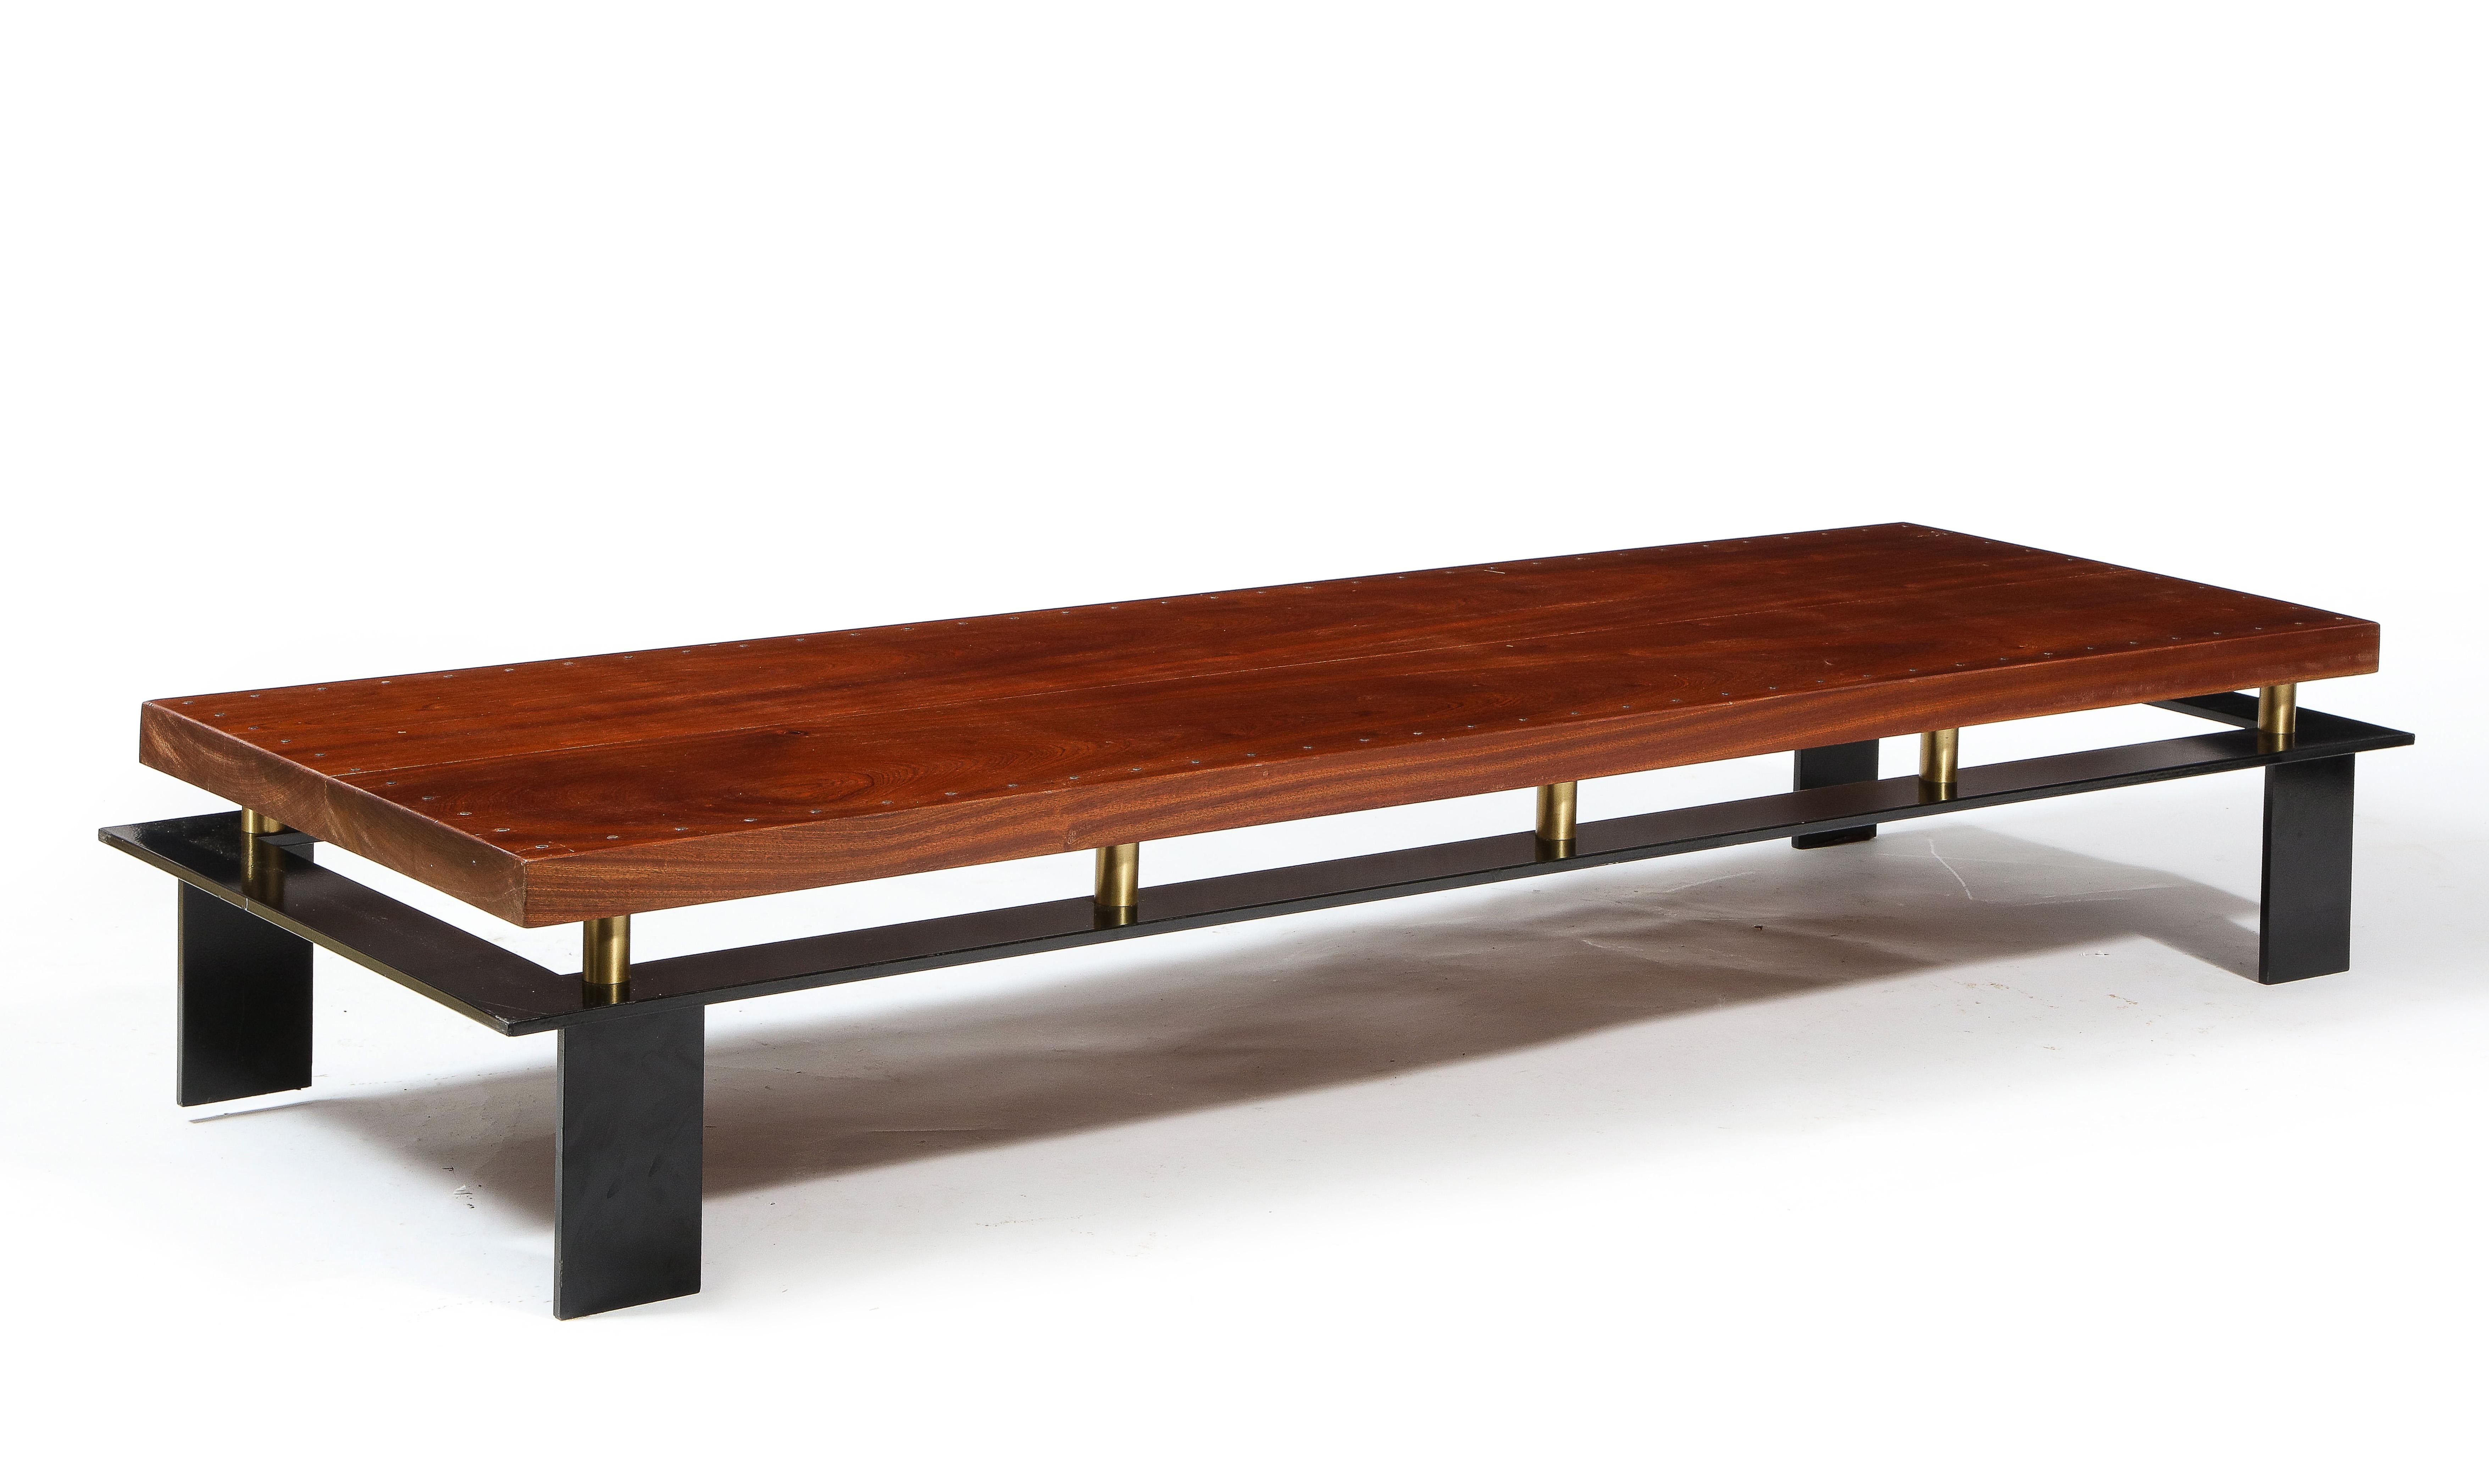 Large Long Low Modernist Steel & Walnut Coffee Table, France 1970's For Sale 1